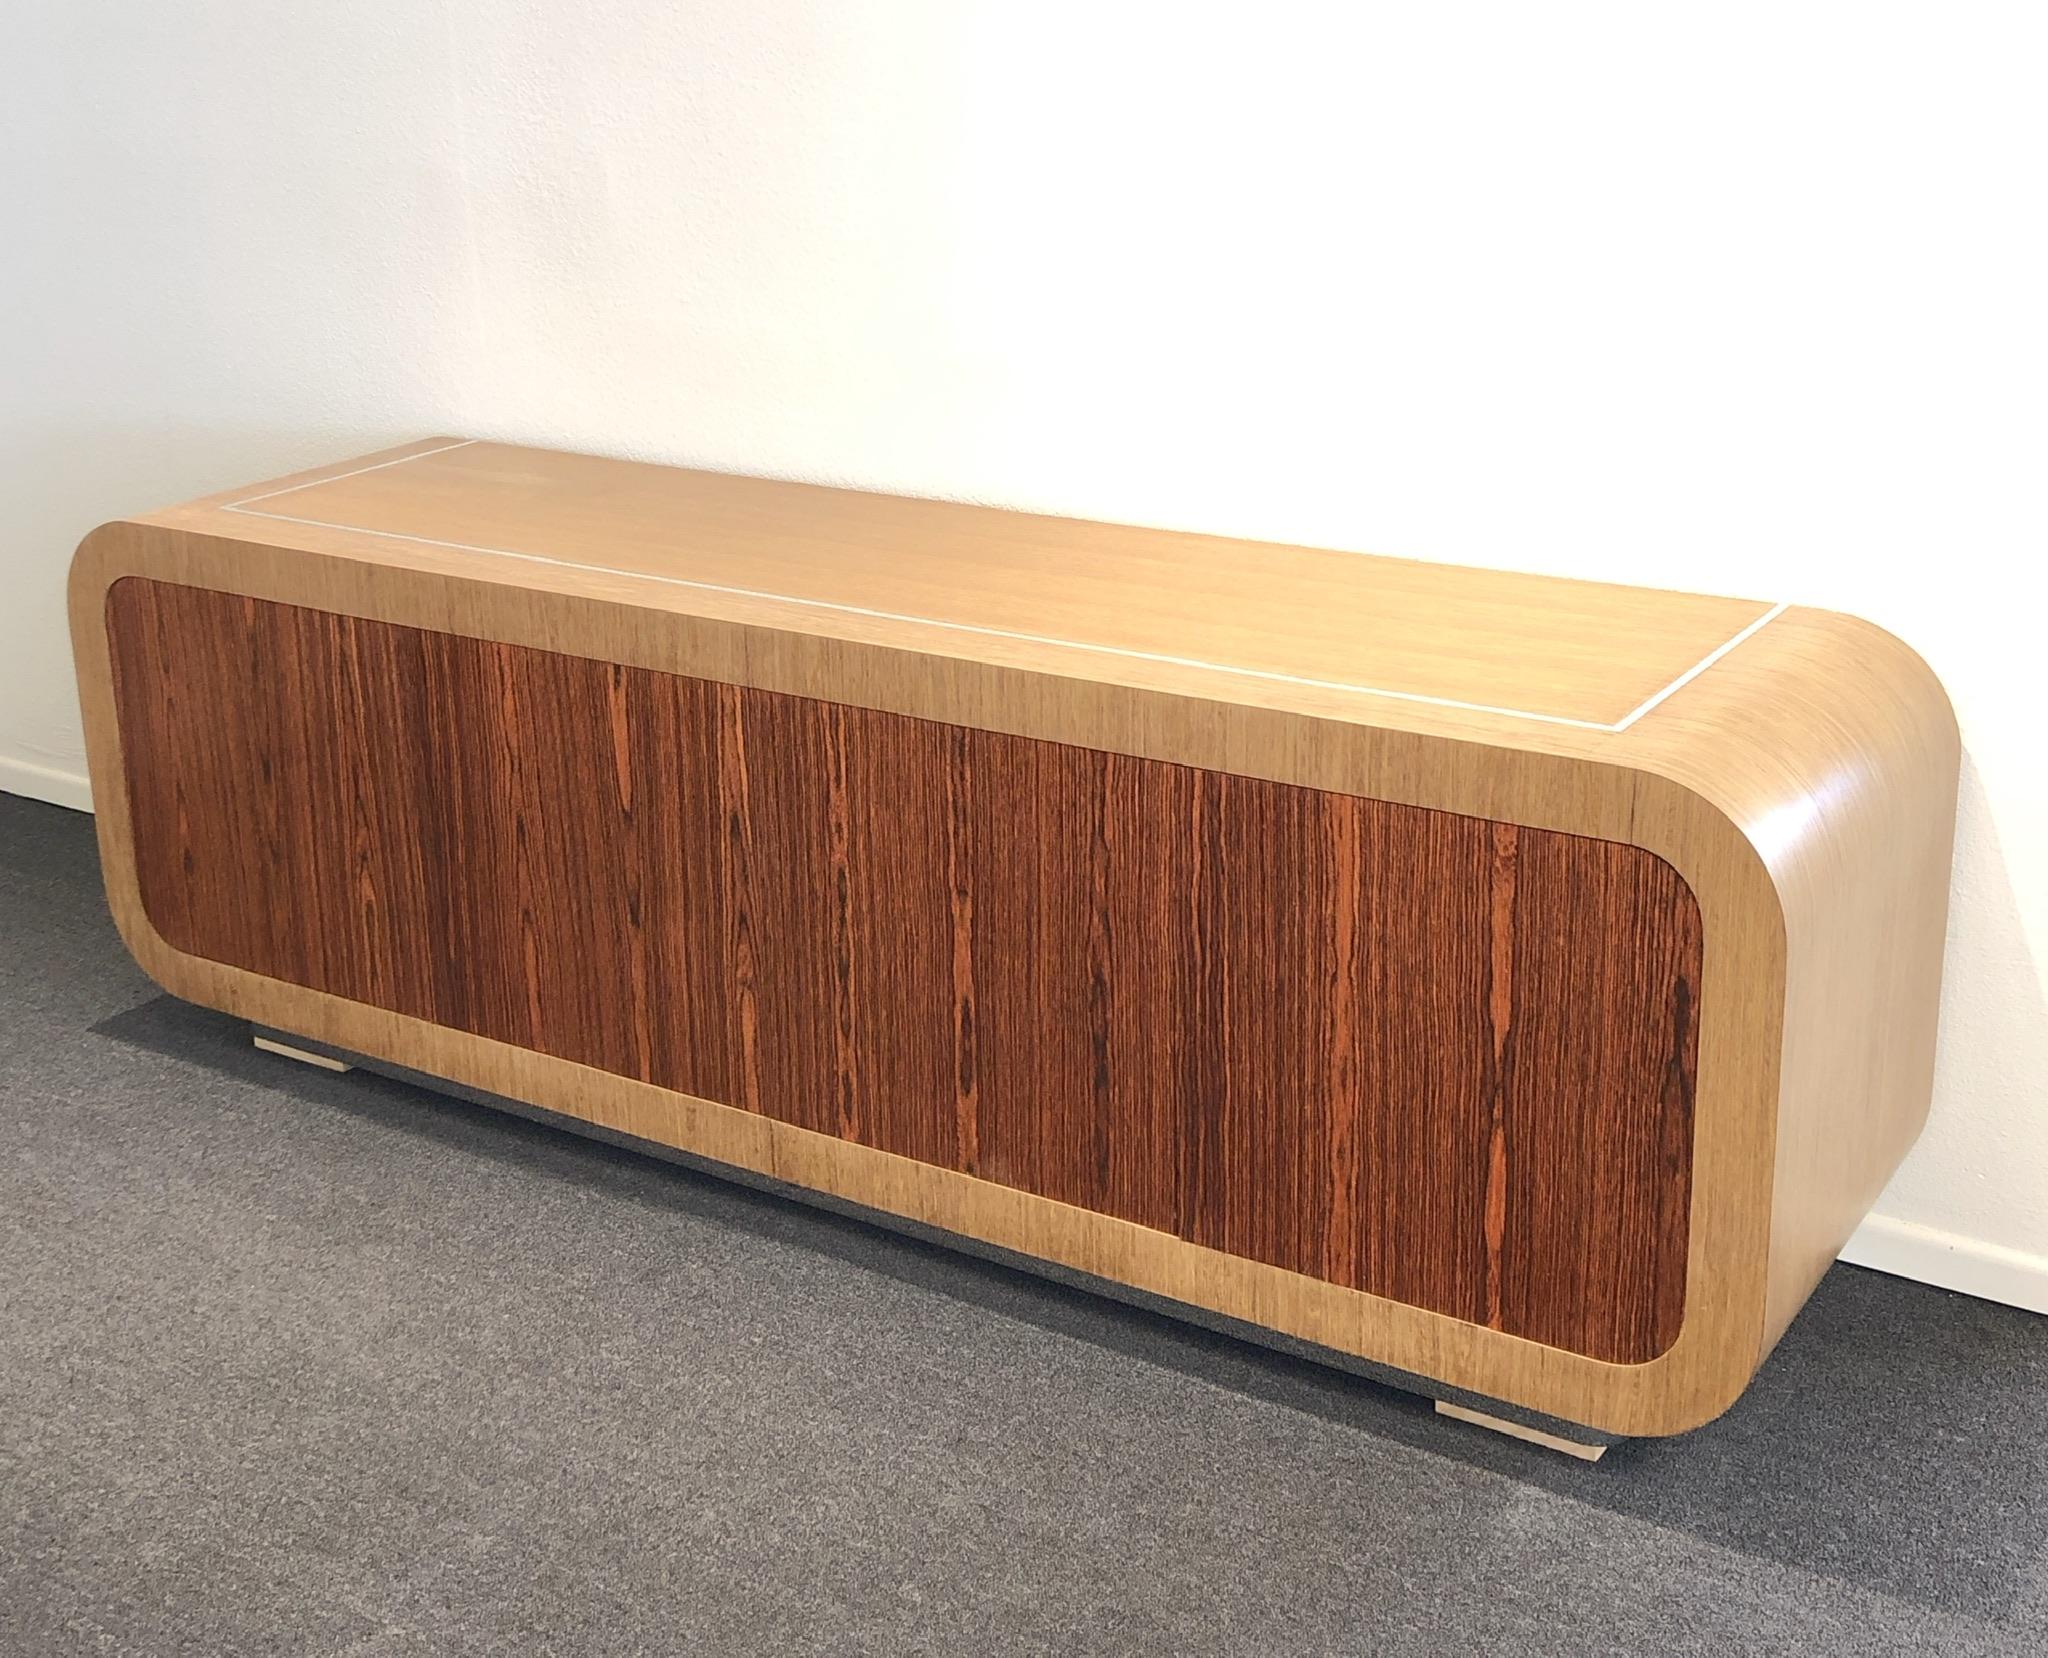 A spectacular custom made credenza design in the 1980’s by Steve Chase for a project in Mission Hill Country Club. The credenza is constructed of oak and rosewood veneer with polish chrome inlaid on top and base. The piece is very heavy and well